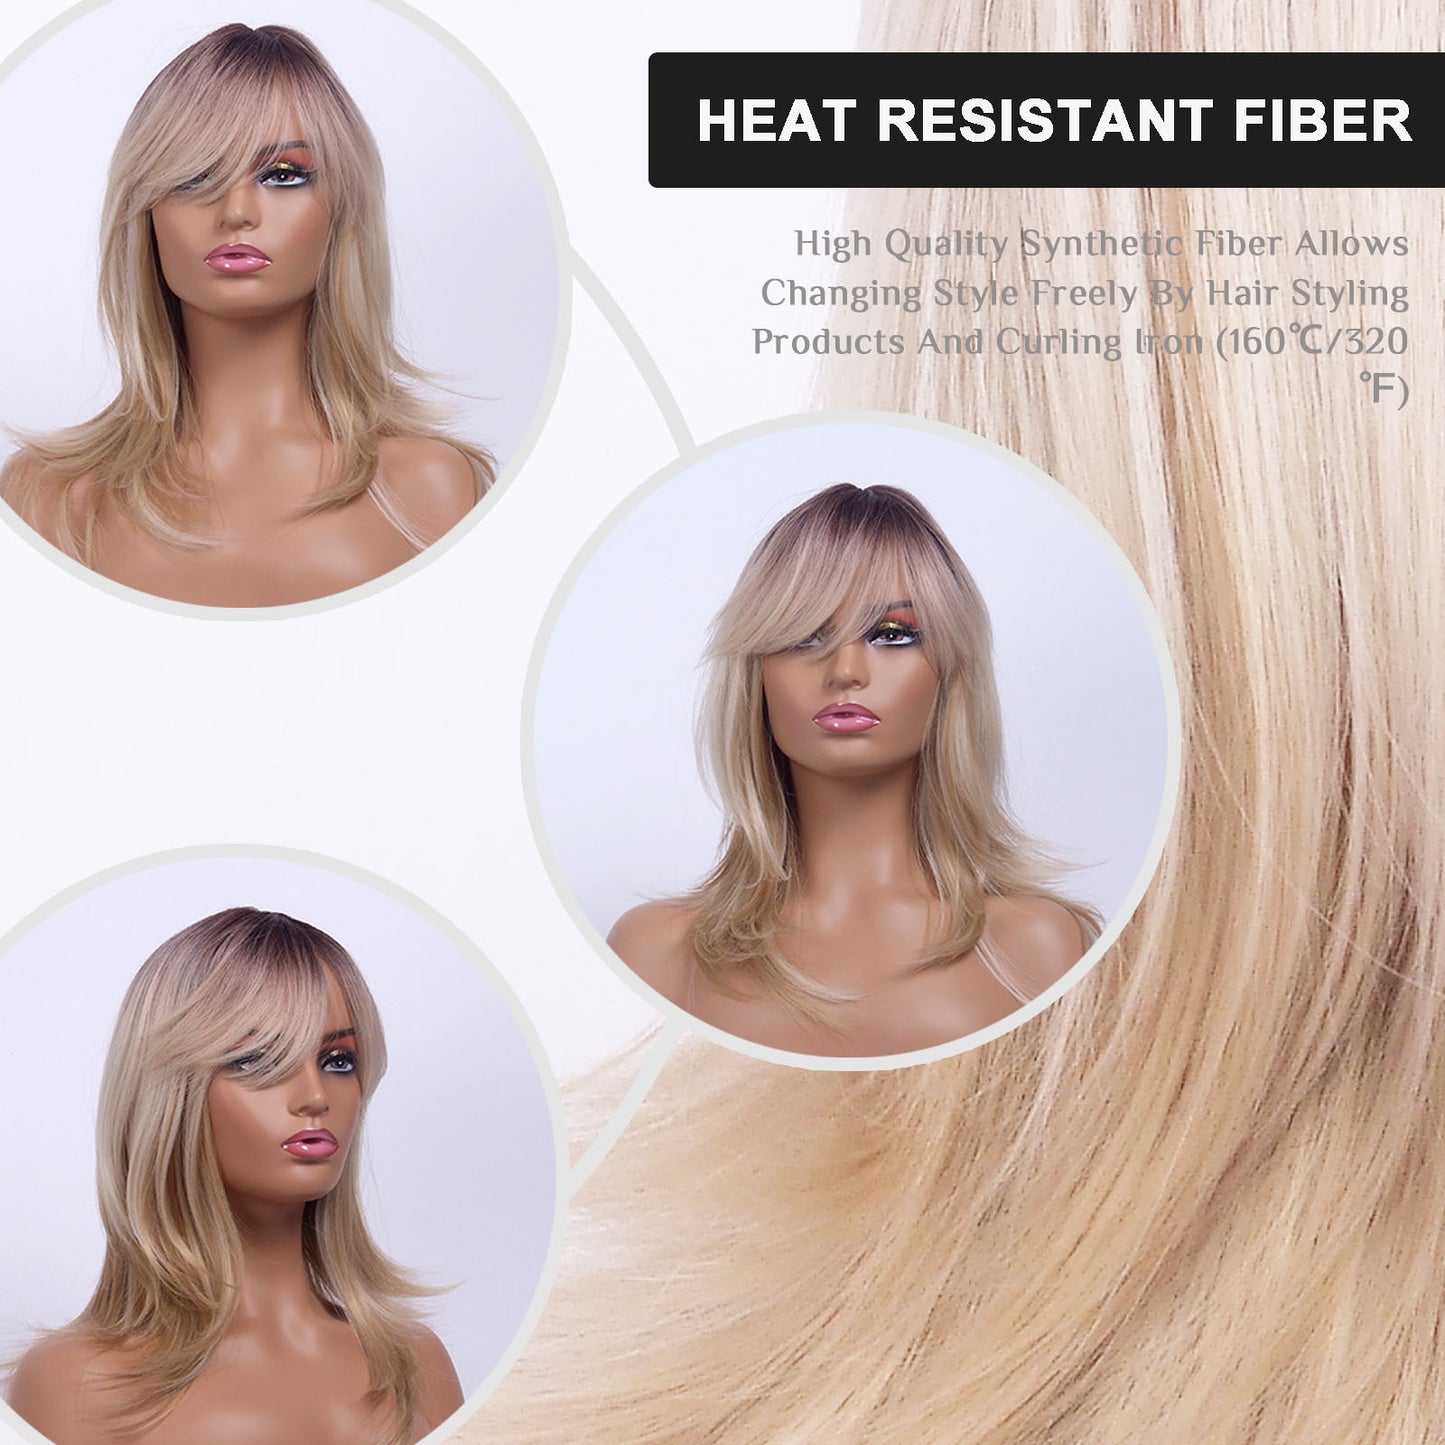 LINGDORA Ombre Blonde Shoulder-Length Wig With Bangs for White Women Natural Looking